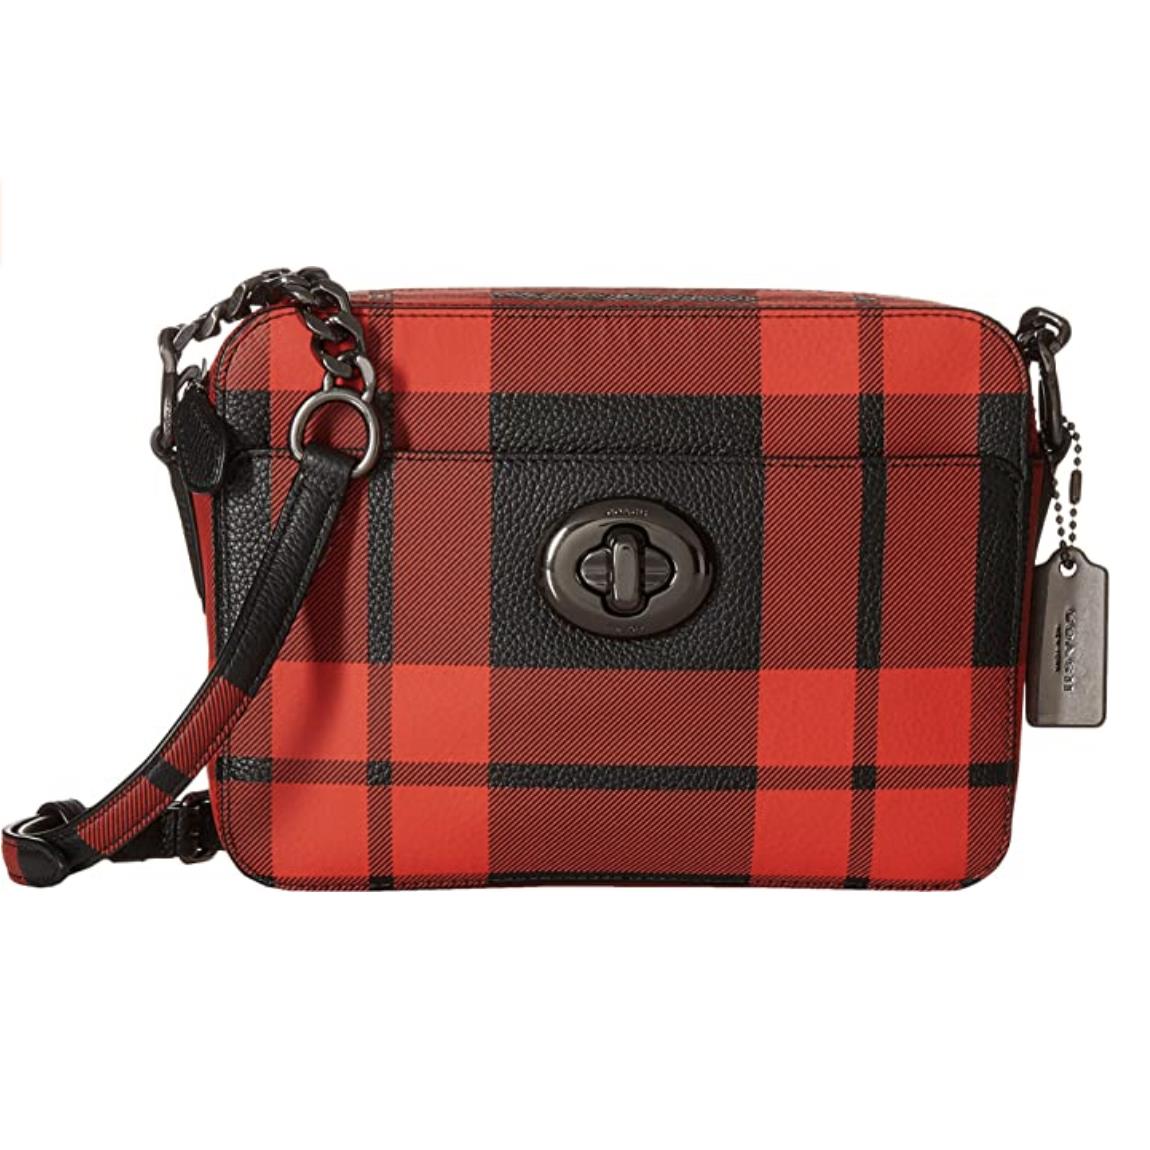 Coach Women`s Plaid Turnlock Camera Bag Red Black Mount Plaid Cross Body Bag - Red Exterior, RED BLACK Lining, RED BLACK Handle/Strap